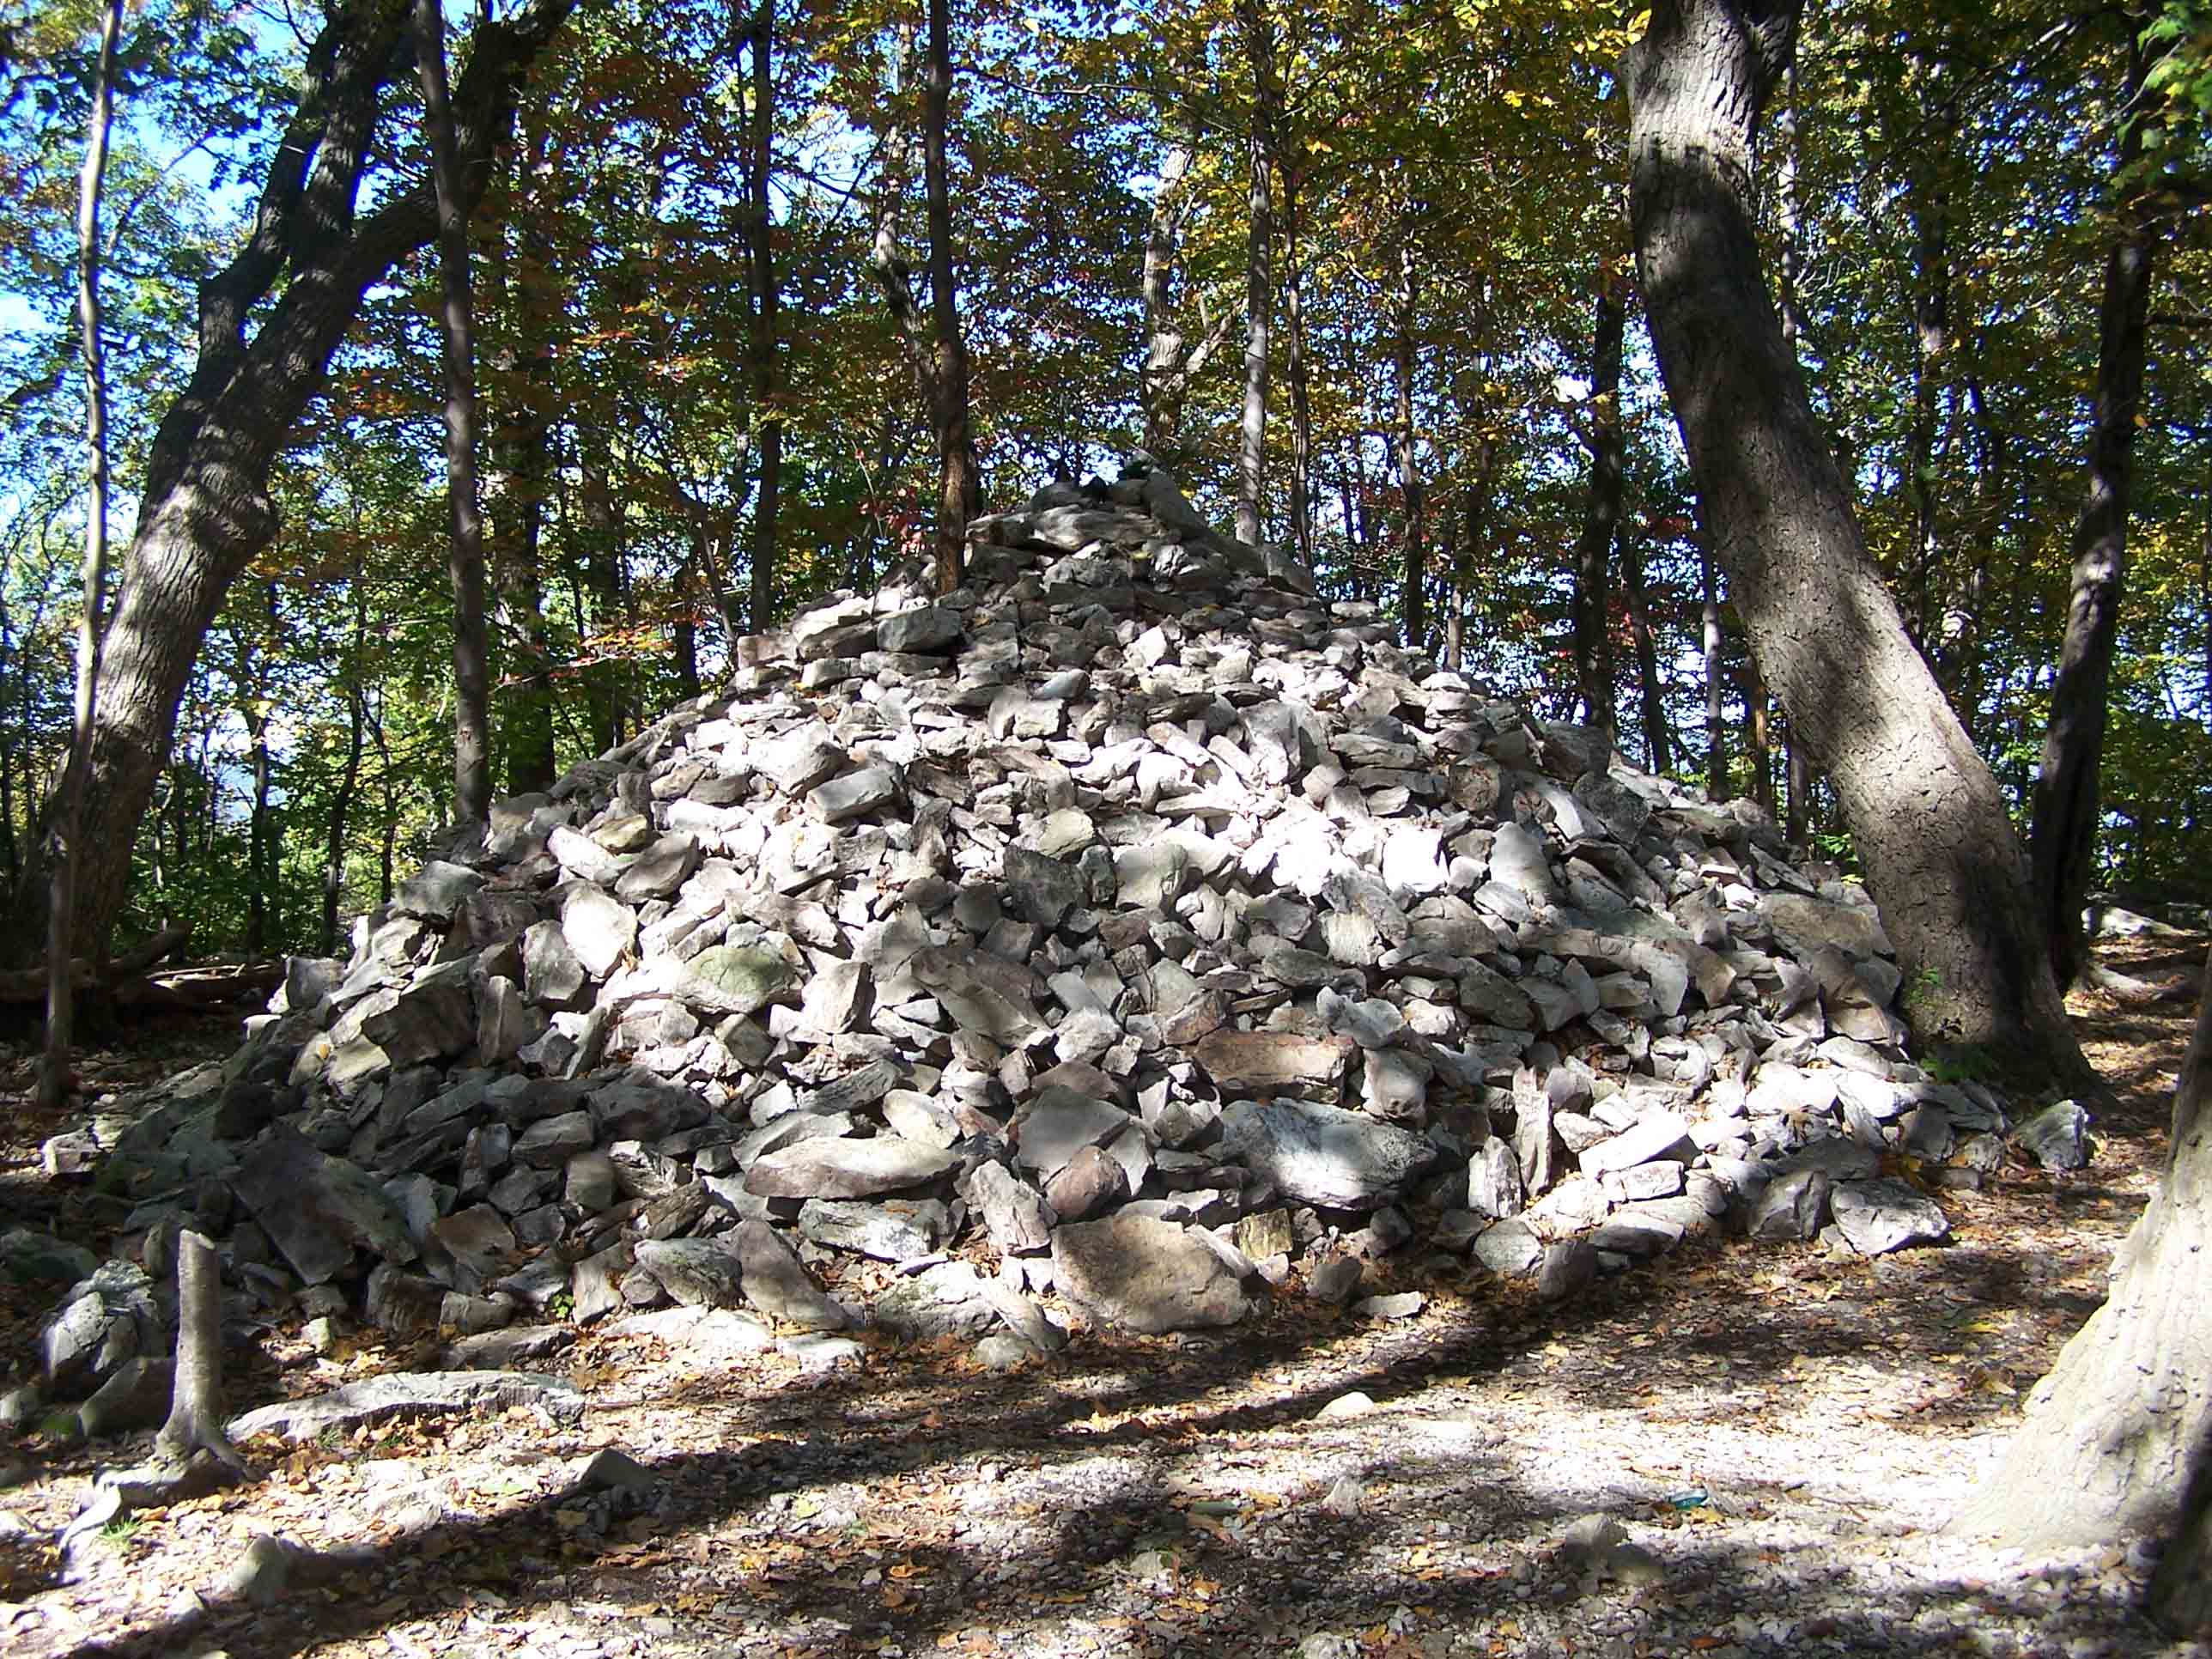 mm 16.8 - Rock pile at the Pinnacle. Courtesy at@rohland.org